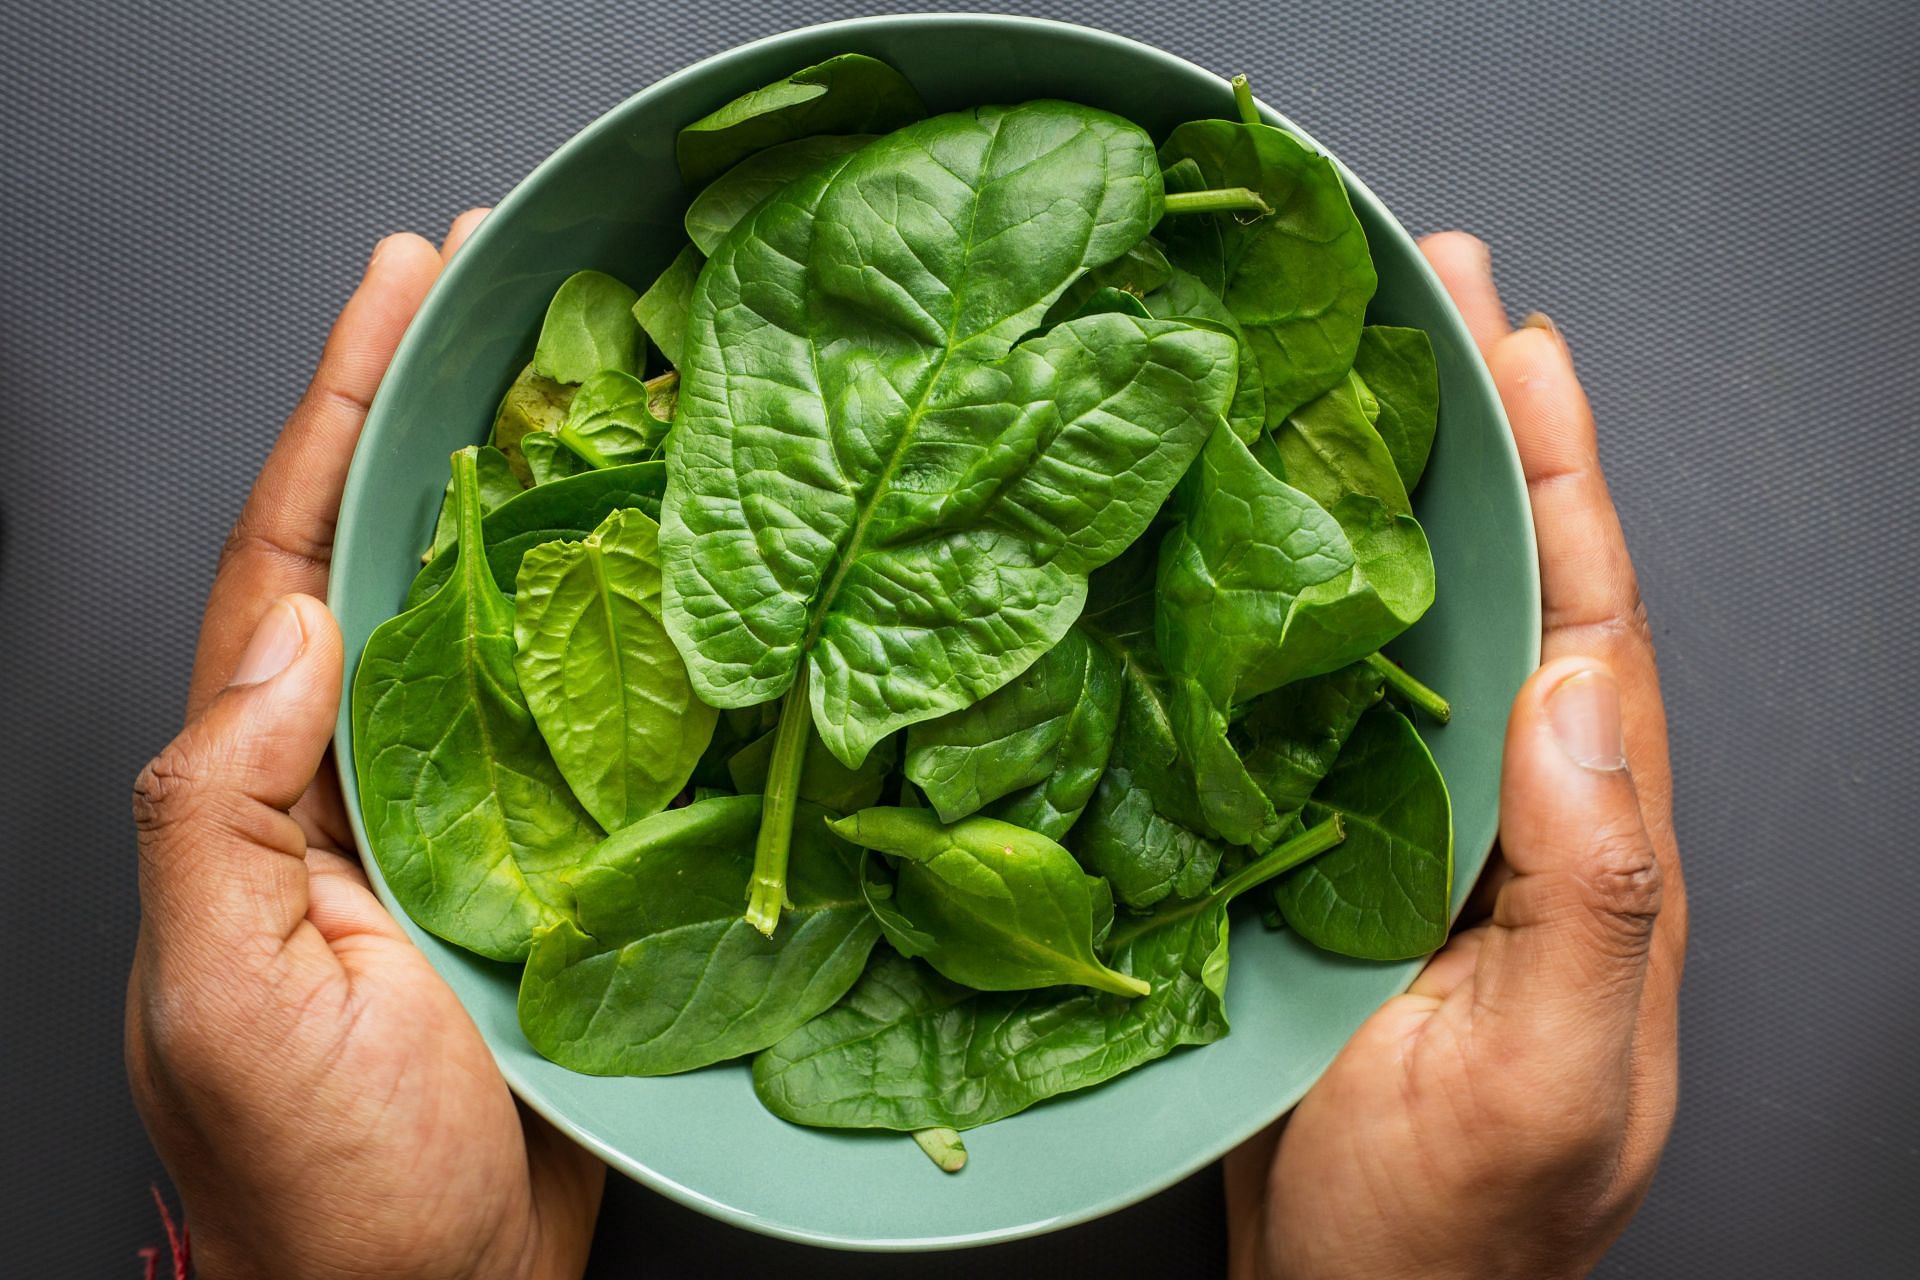 Spinach is a superfood. (Image via Unsplash/Louis Hansel)